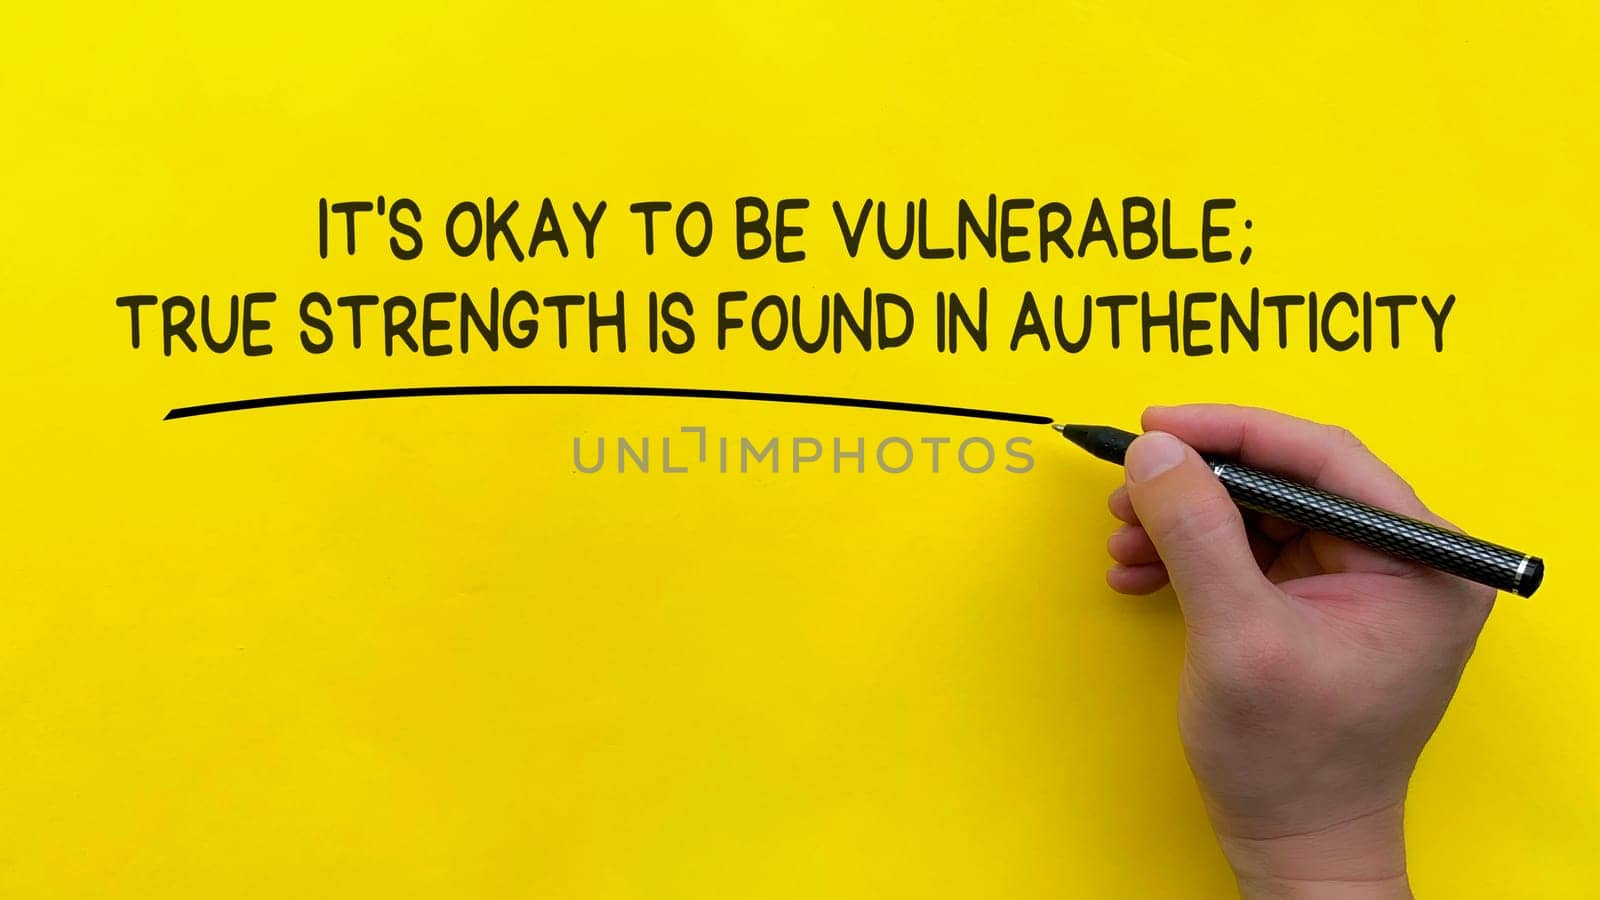 Hand writing It is okay to be vulnerable affirmation on yellow cover background. Affirmation concept